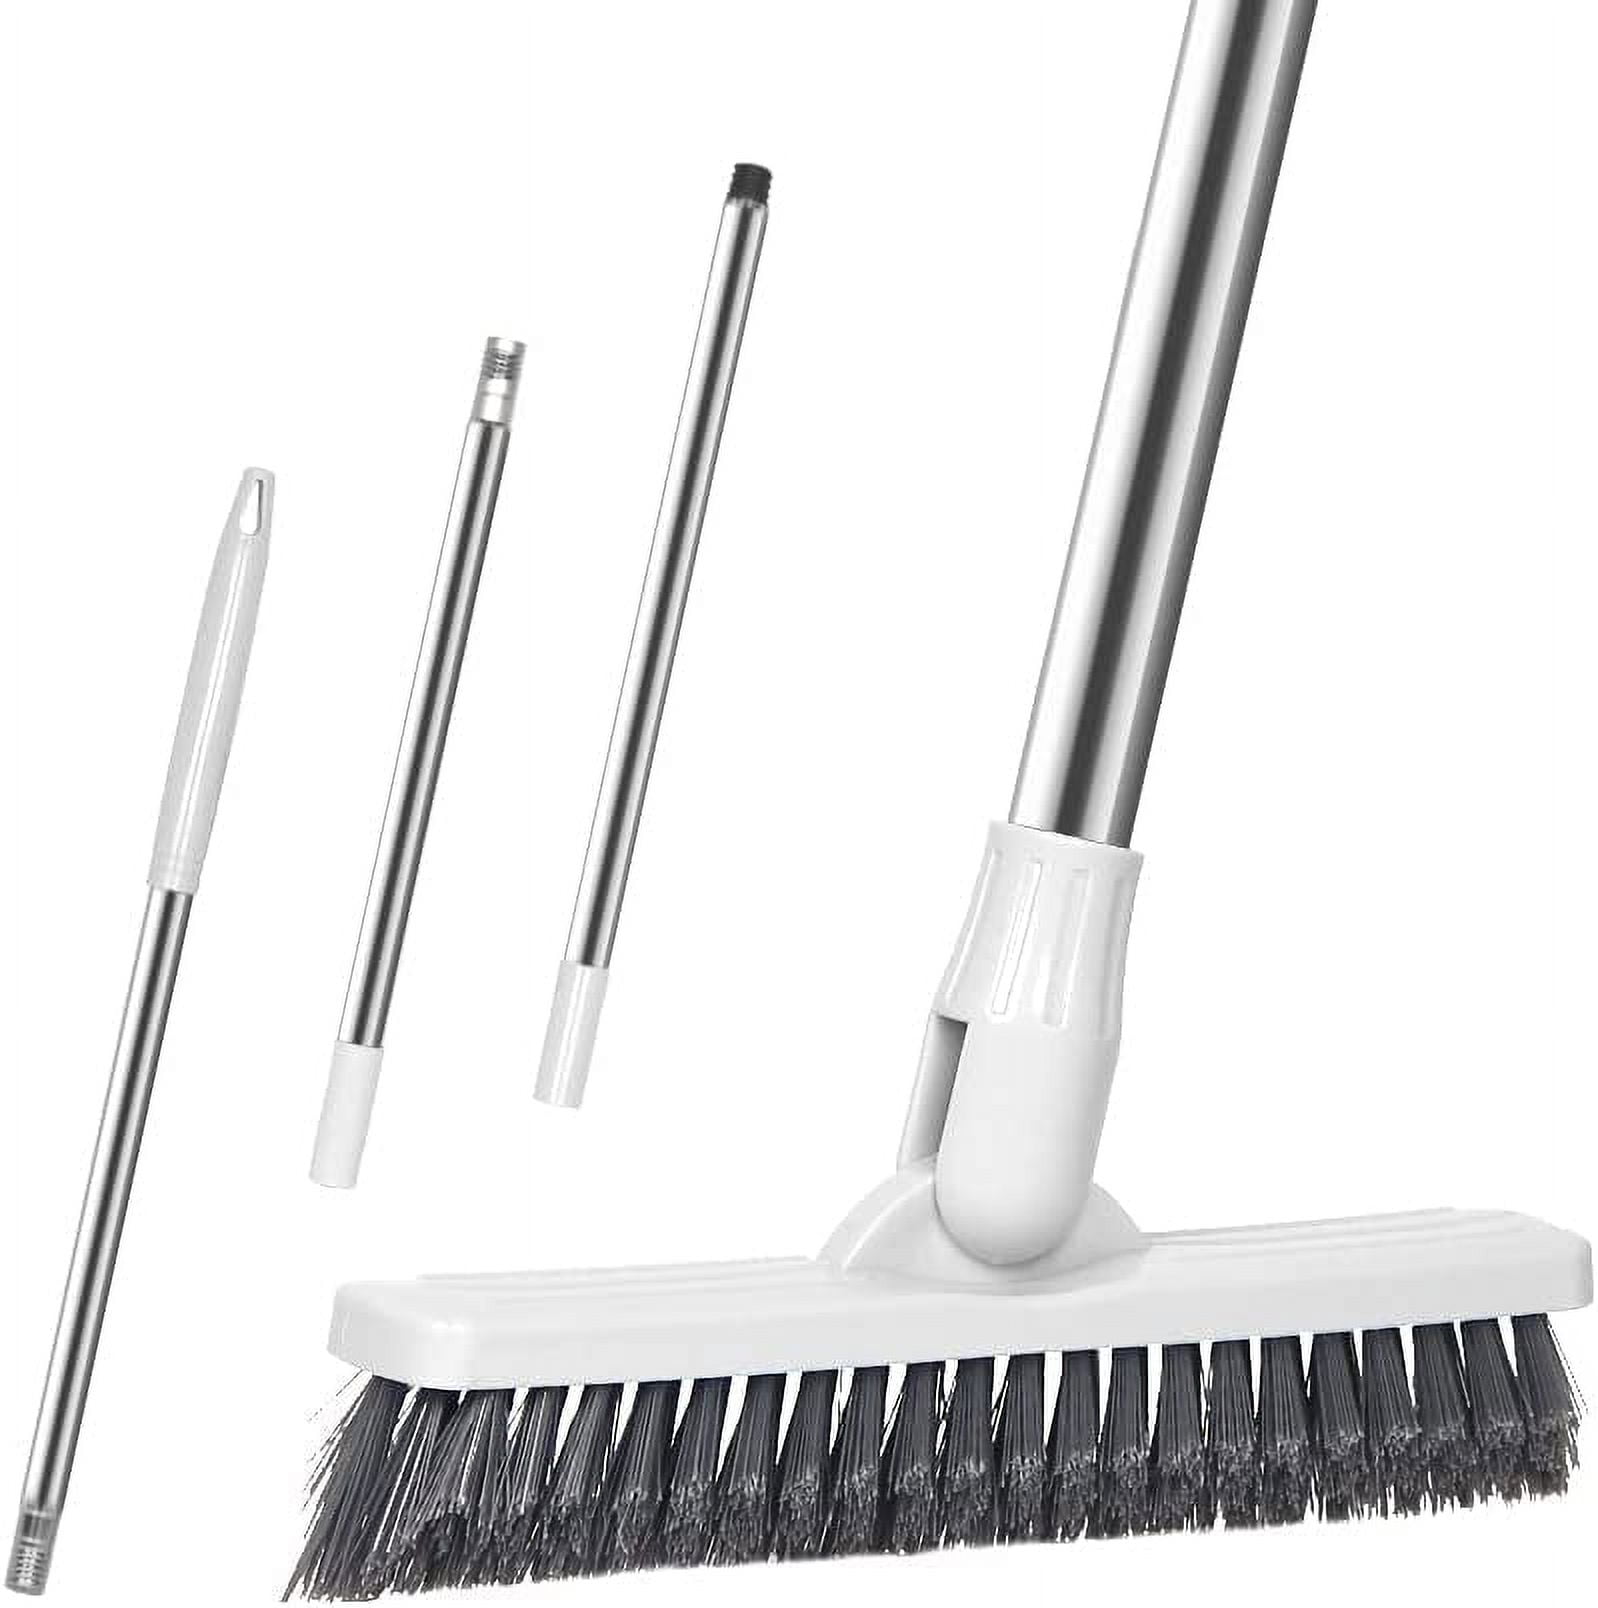 Rotating Cleaning Brush Crevice Floor Scrub Brush Tile Grout Broom